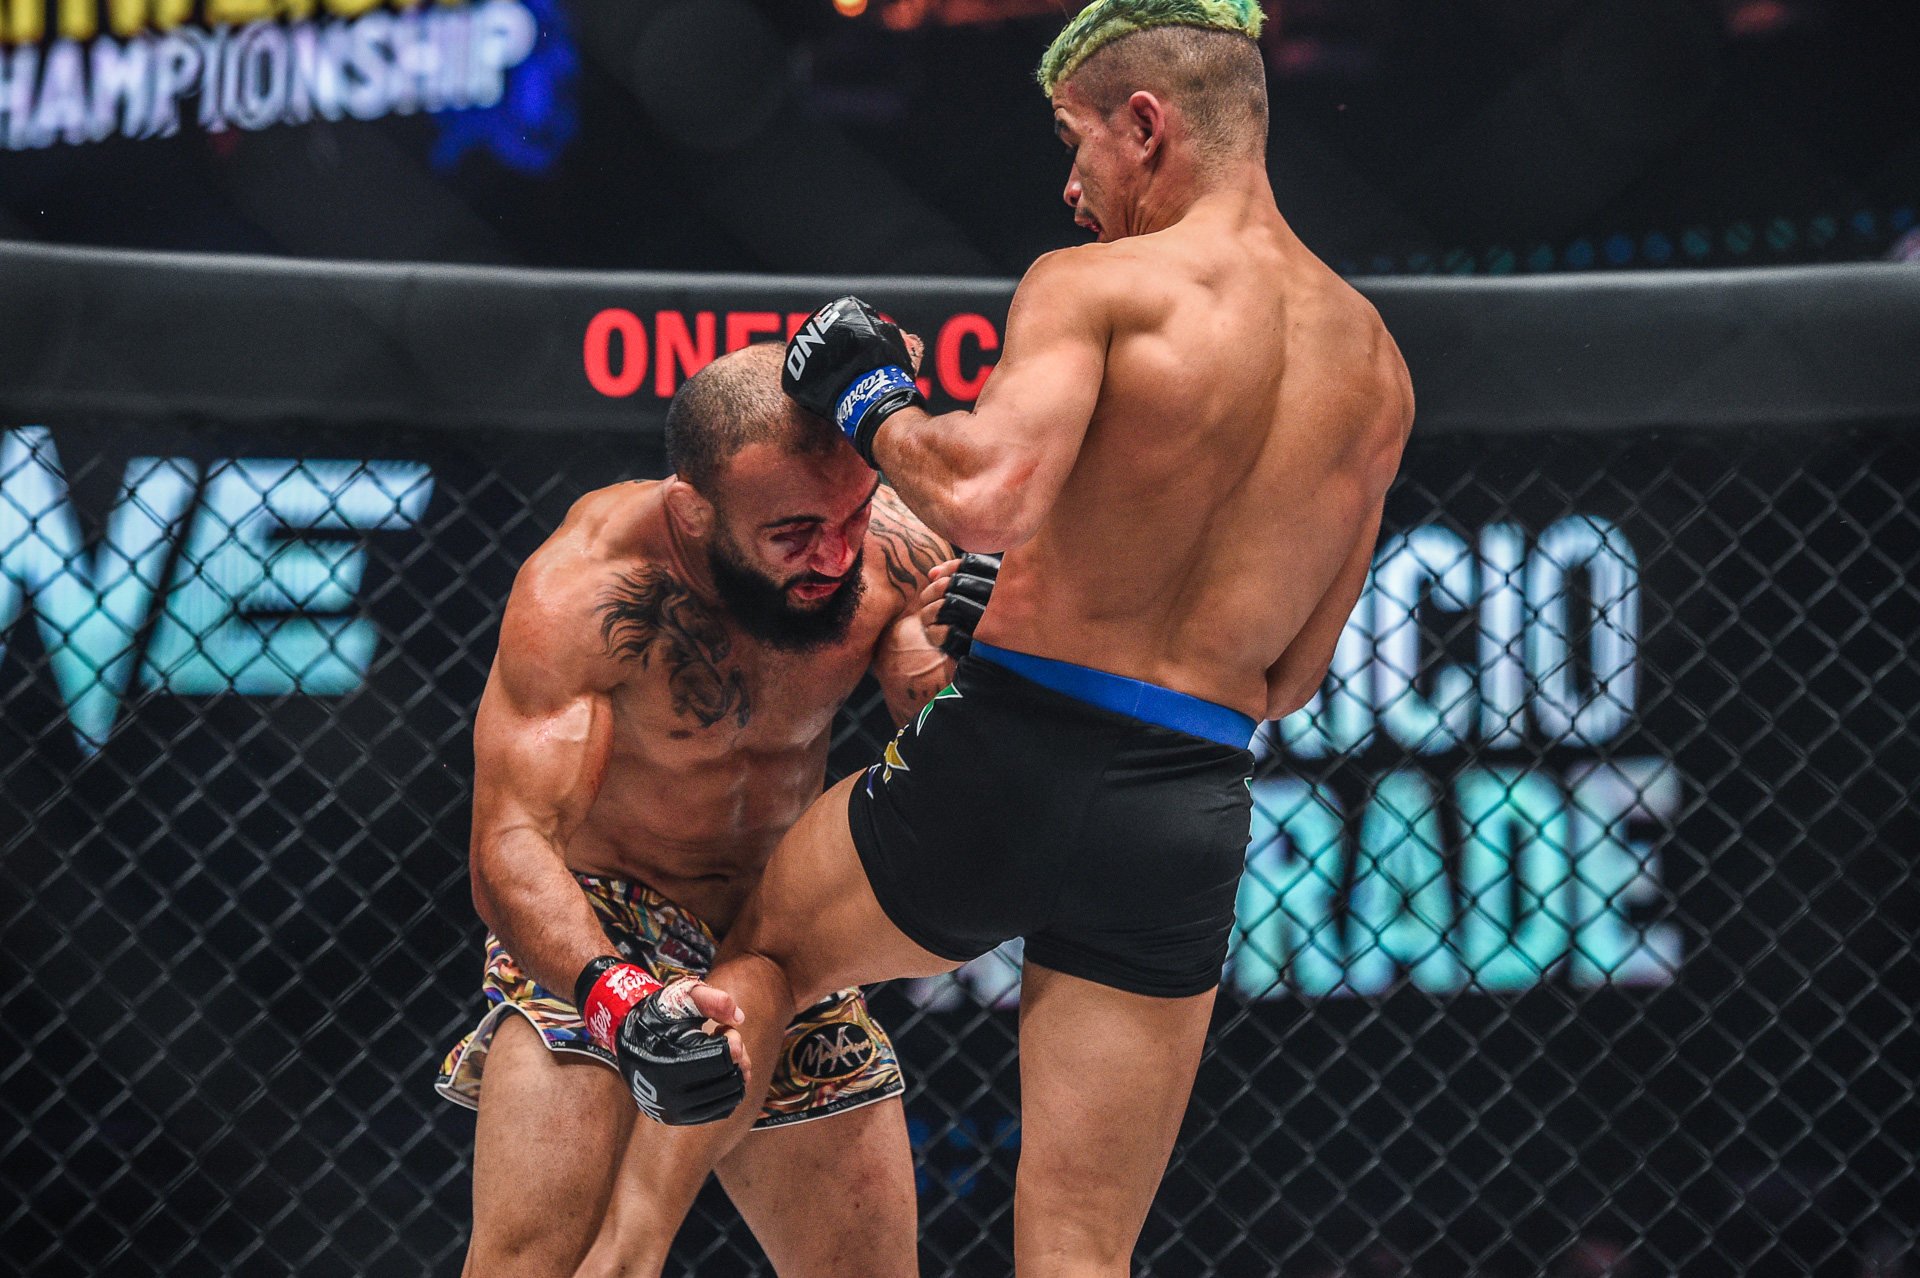 Fabricio Andrade lands an accidental low blow on John Lineker. Photos: ONE Championship